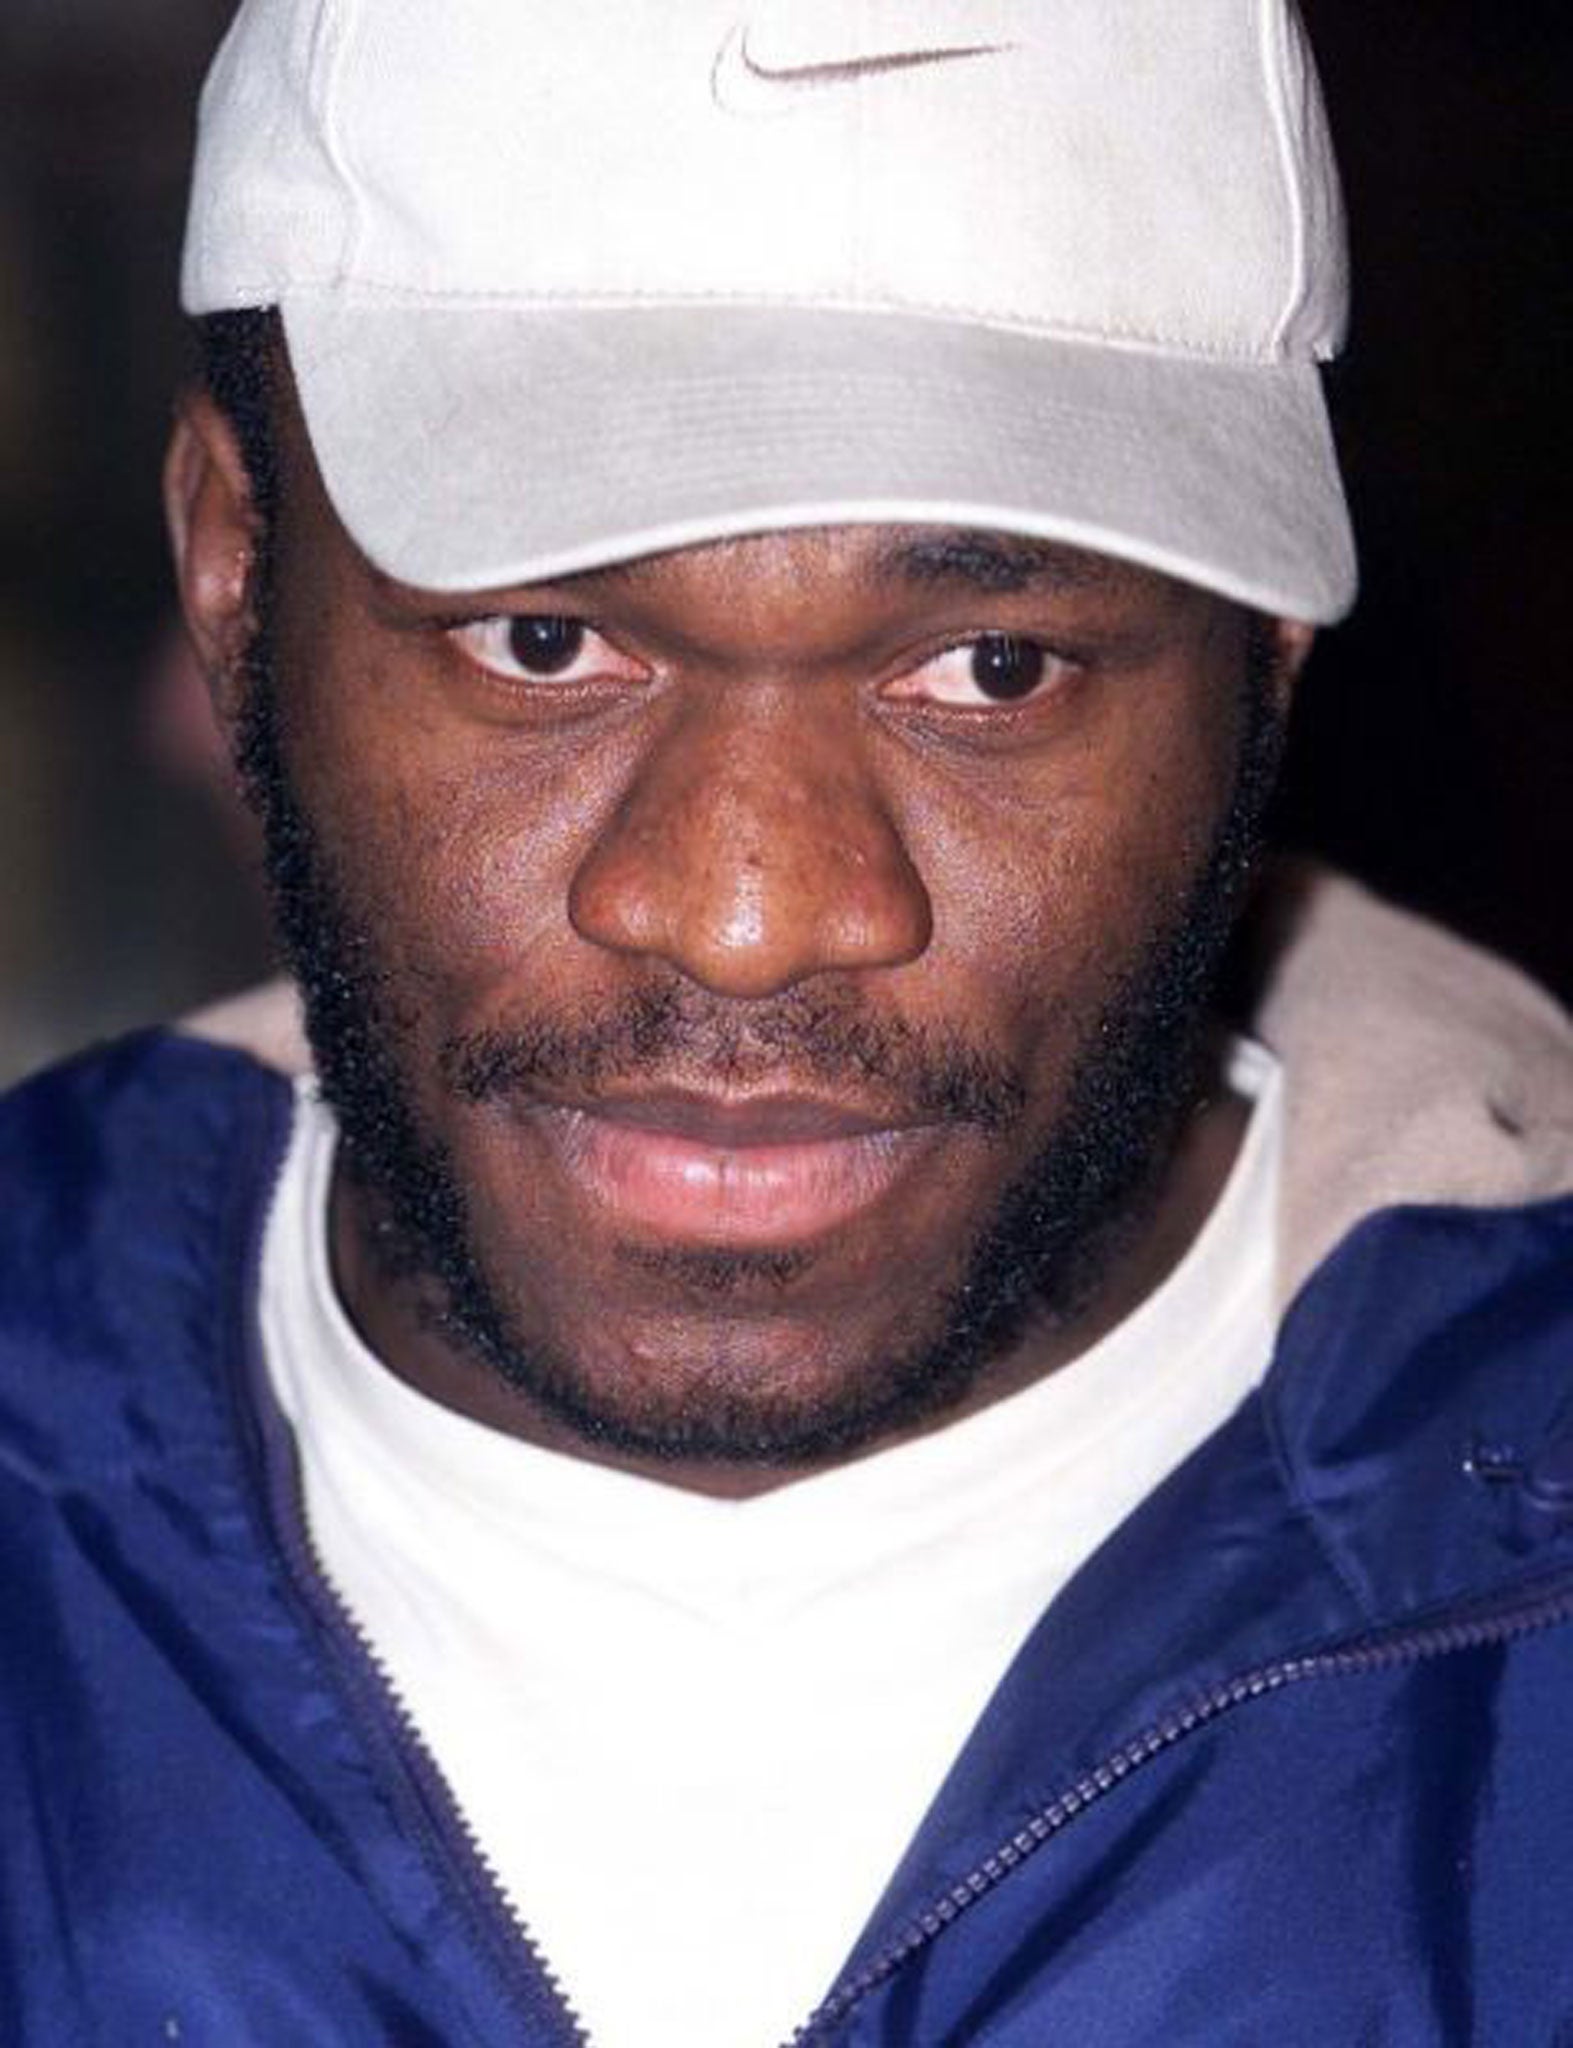 Former WBO heavyweight champion Herbie Hide has appeared in court over drugs offences